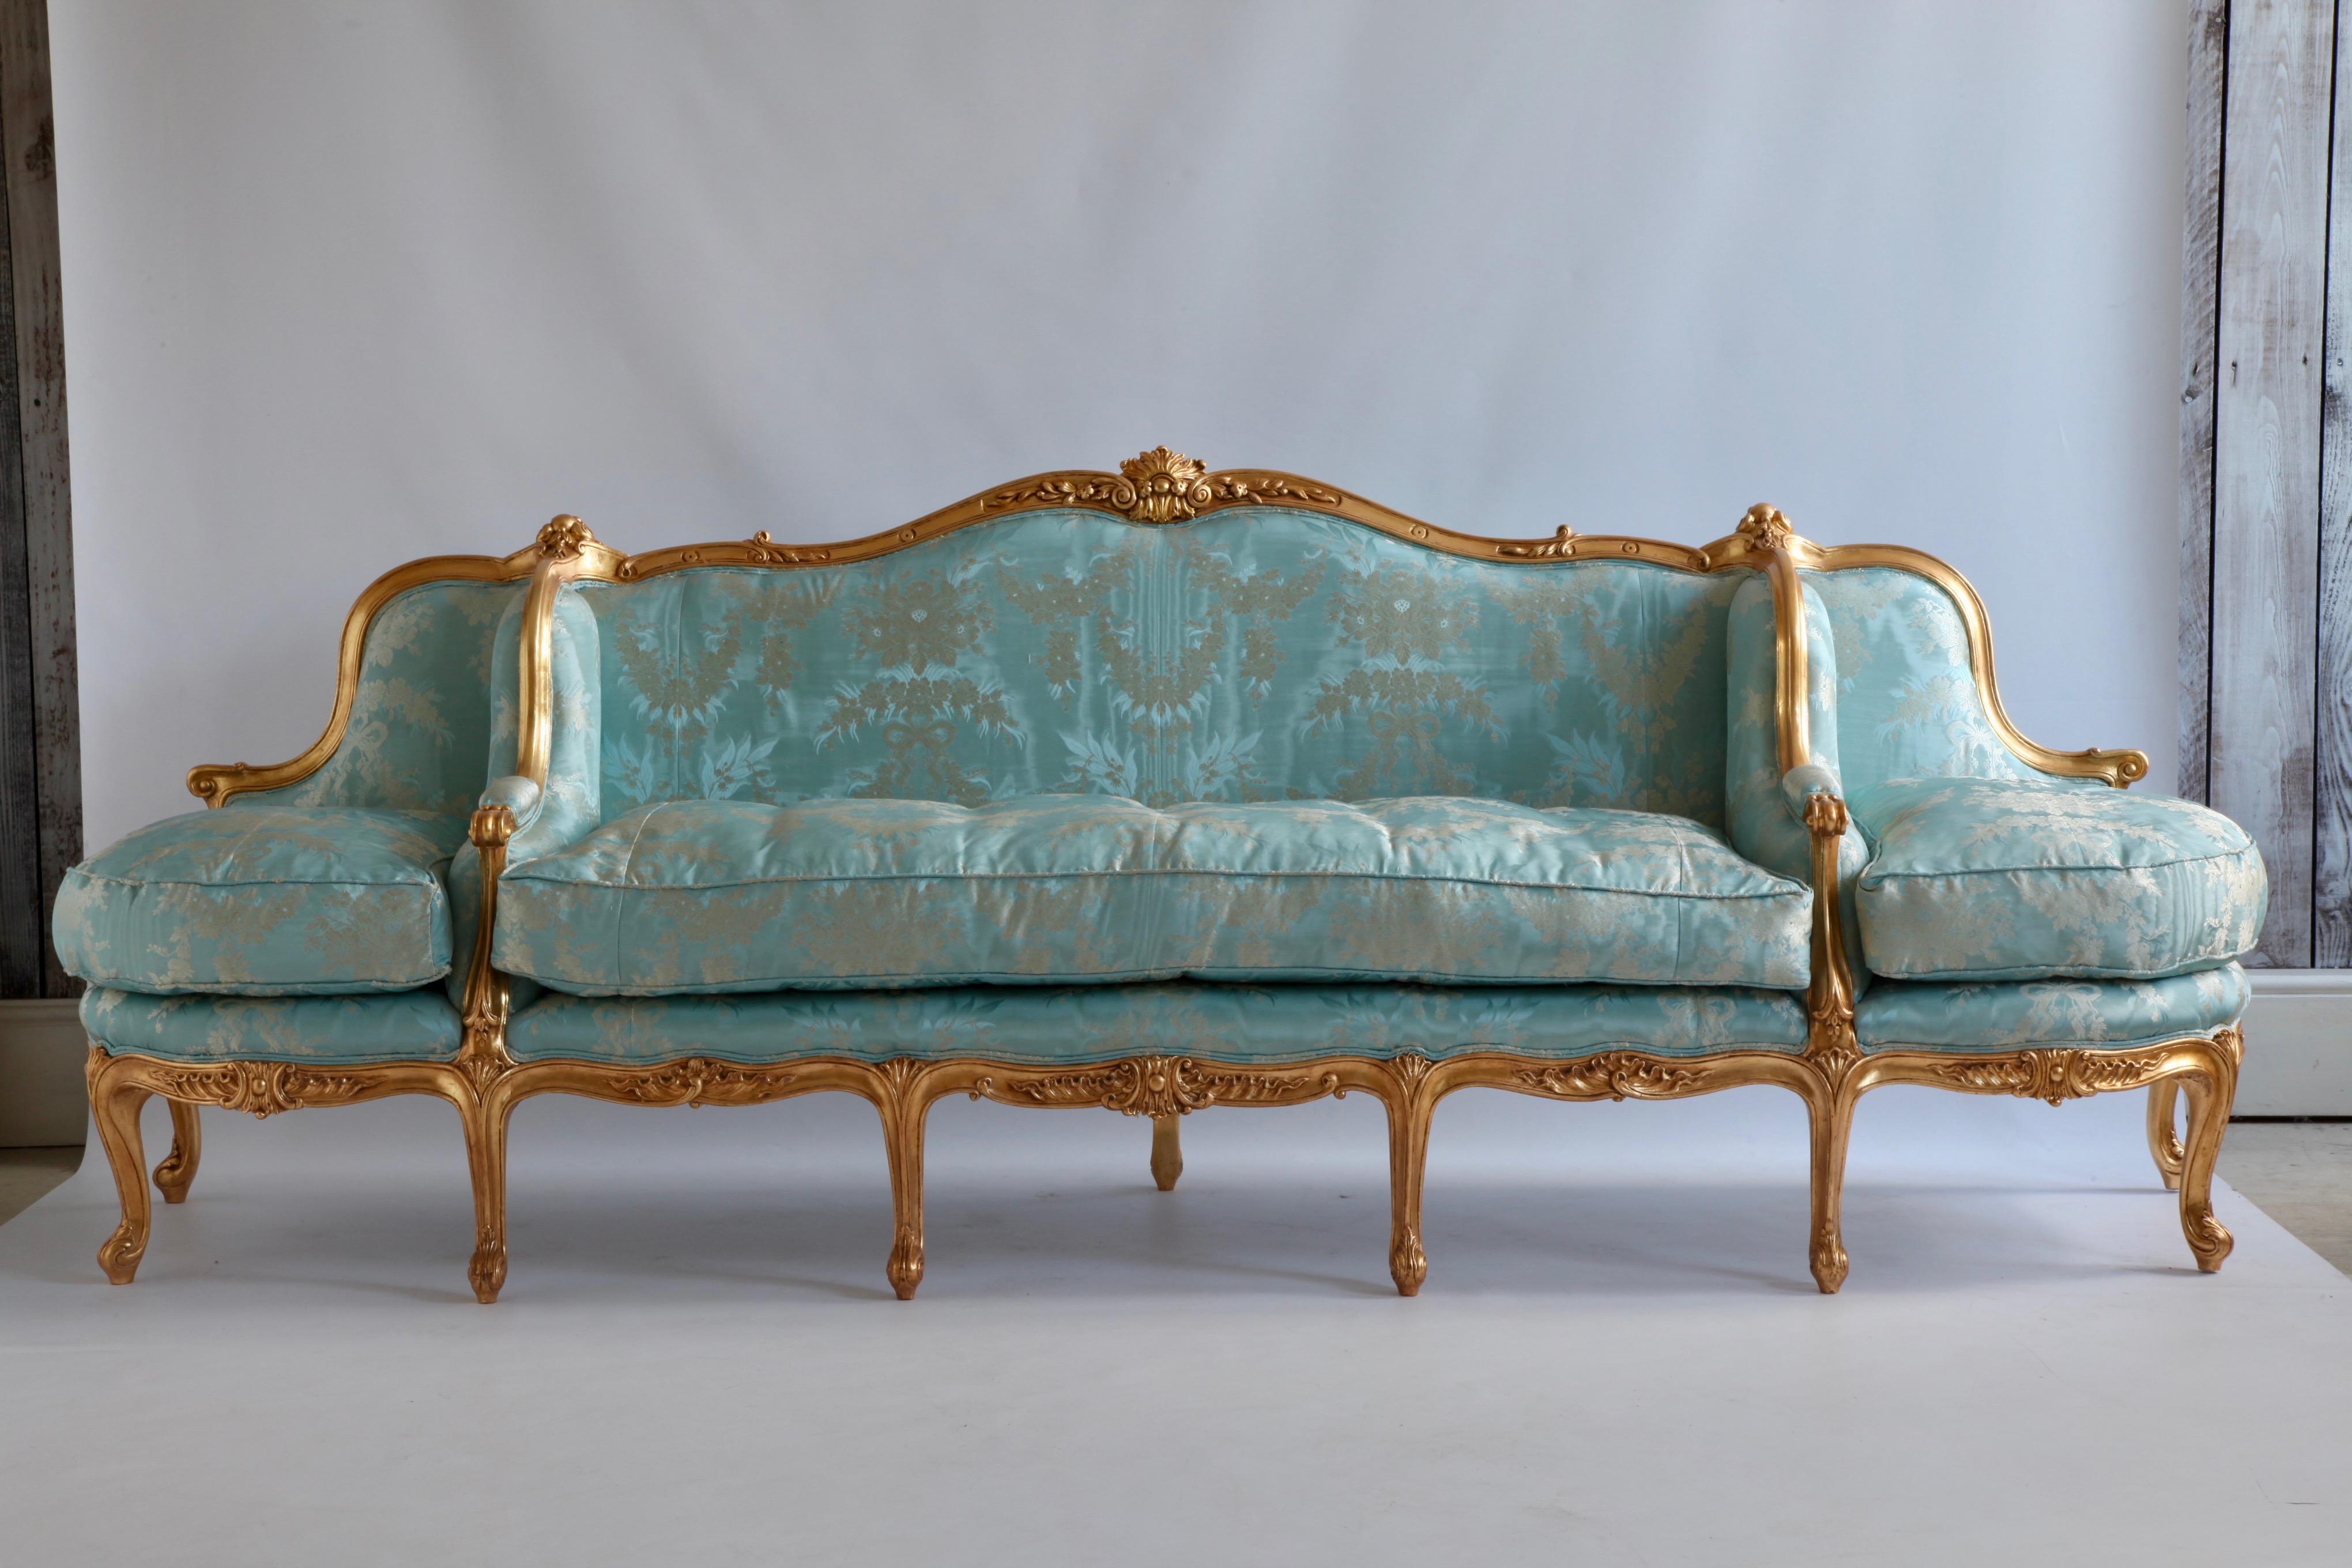 An elegant and impressive large Louis XV style confidante sofa which has been hand carved and gilded using traditional methods and materials to achieve an authentic period finish. The comfort of the sofa is enhanced with feather and down for the